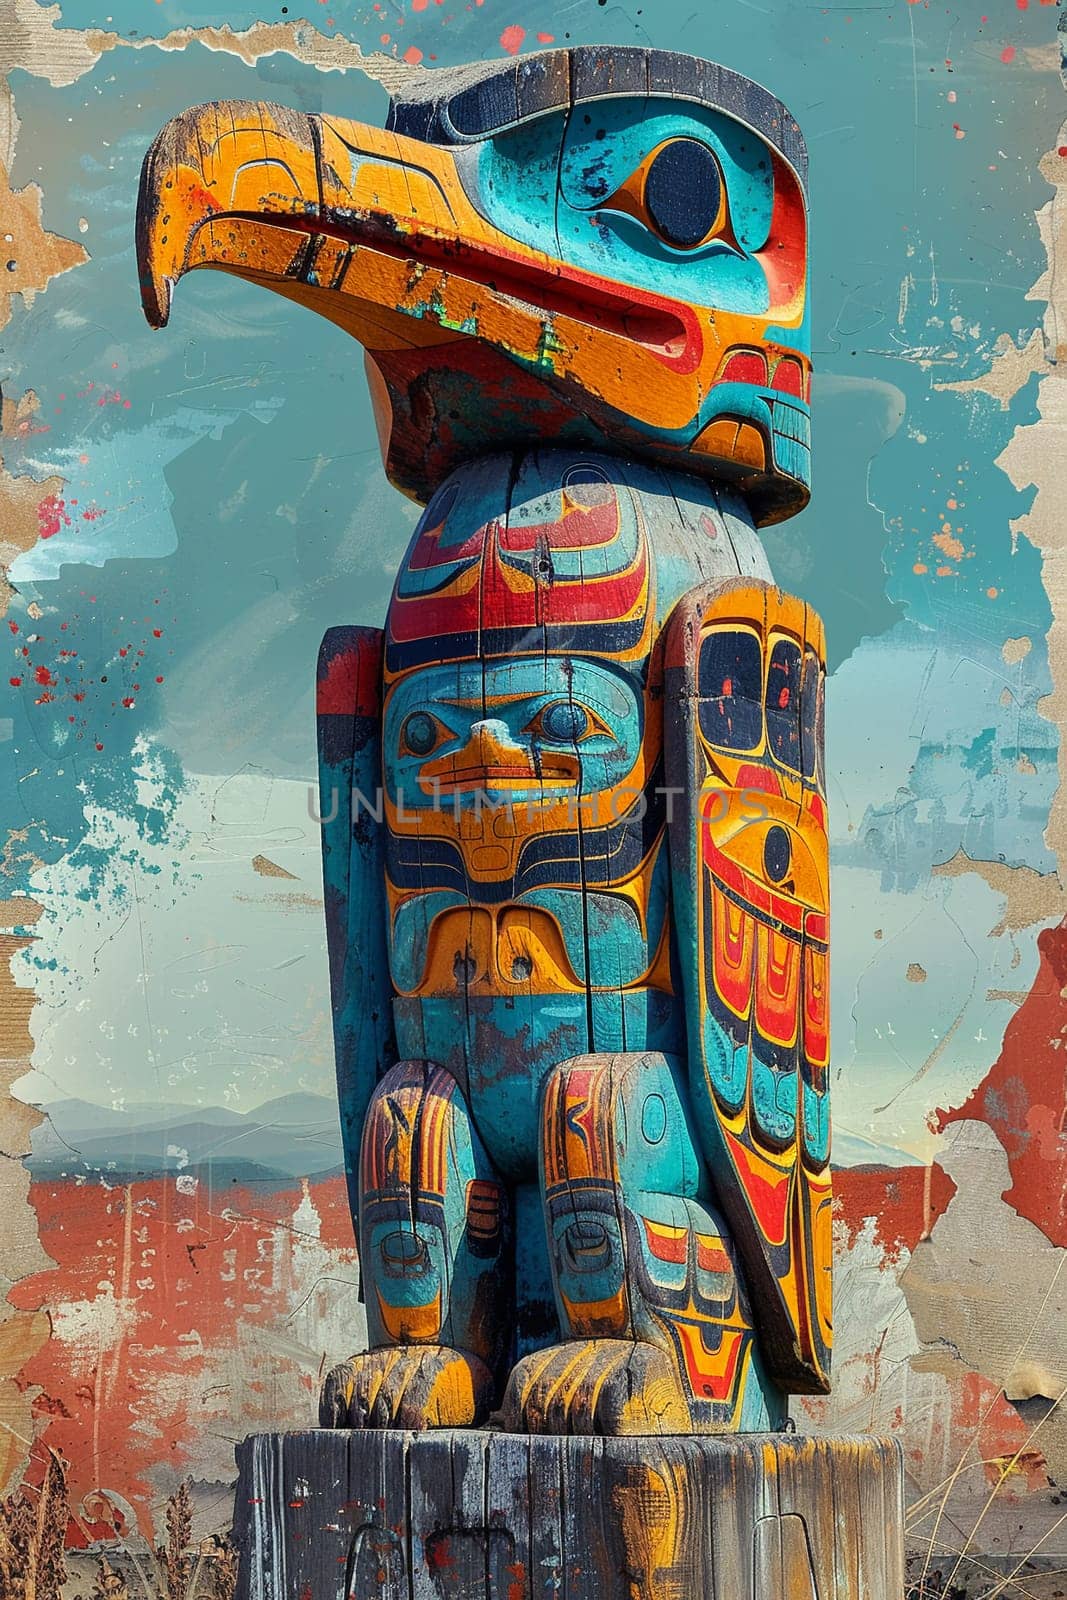 Native American Totem Pole Telling Stories in Faded Colors, The historical narrative merges with the sky, telling tales of spirituality and life.